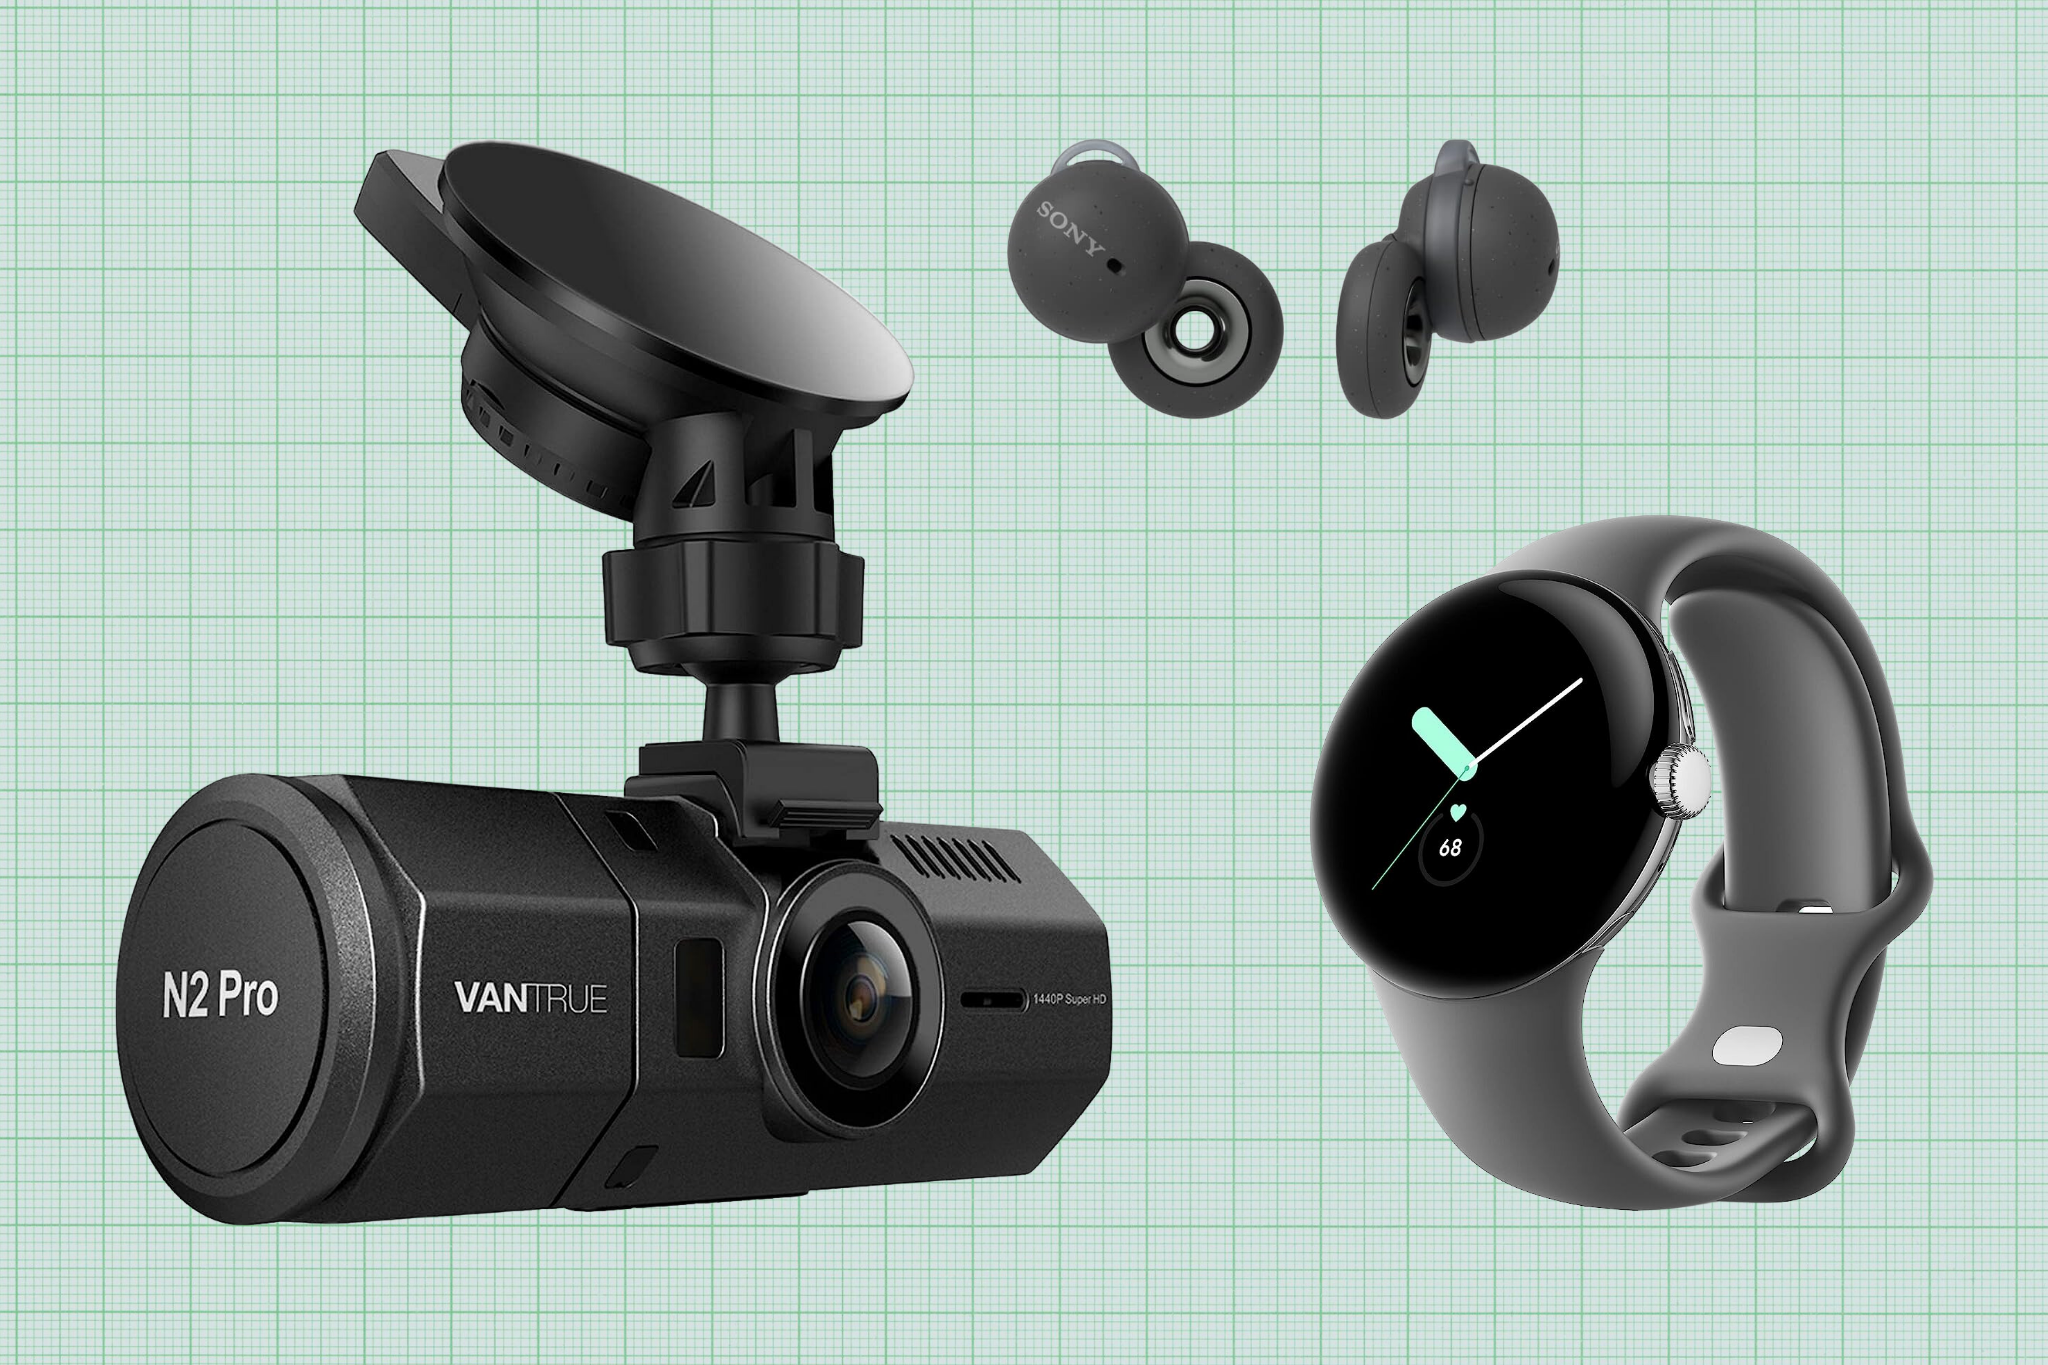 Vantrue N2 Pro Dual Dash Cam, Google Pixel smartwatch, and Sony LinkBuds Truly Wireless Earbuds against a green graph paper background; lead image for Best Prime Day Tech Deals